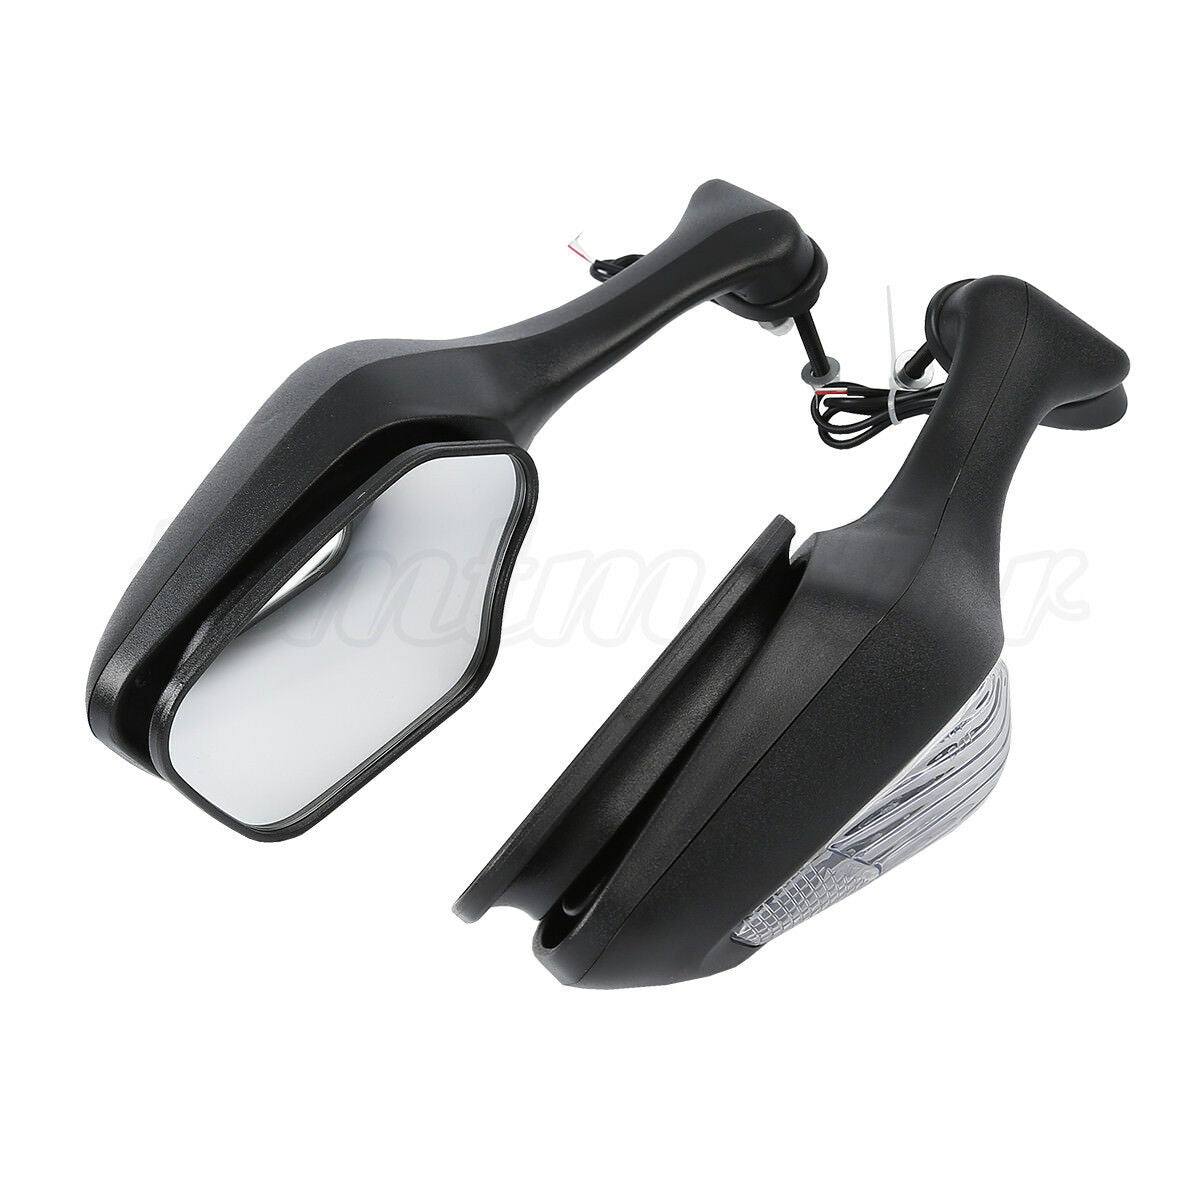 Rear View Mirrors LED Turn Signal Light White For Honda CBR1000RR 2008-2016 2010 - Moto Life Products